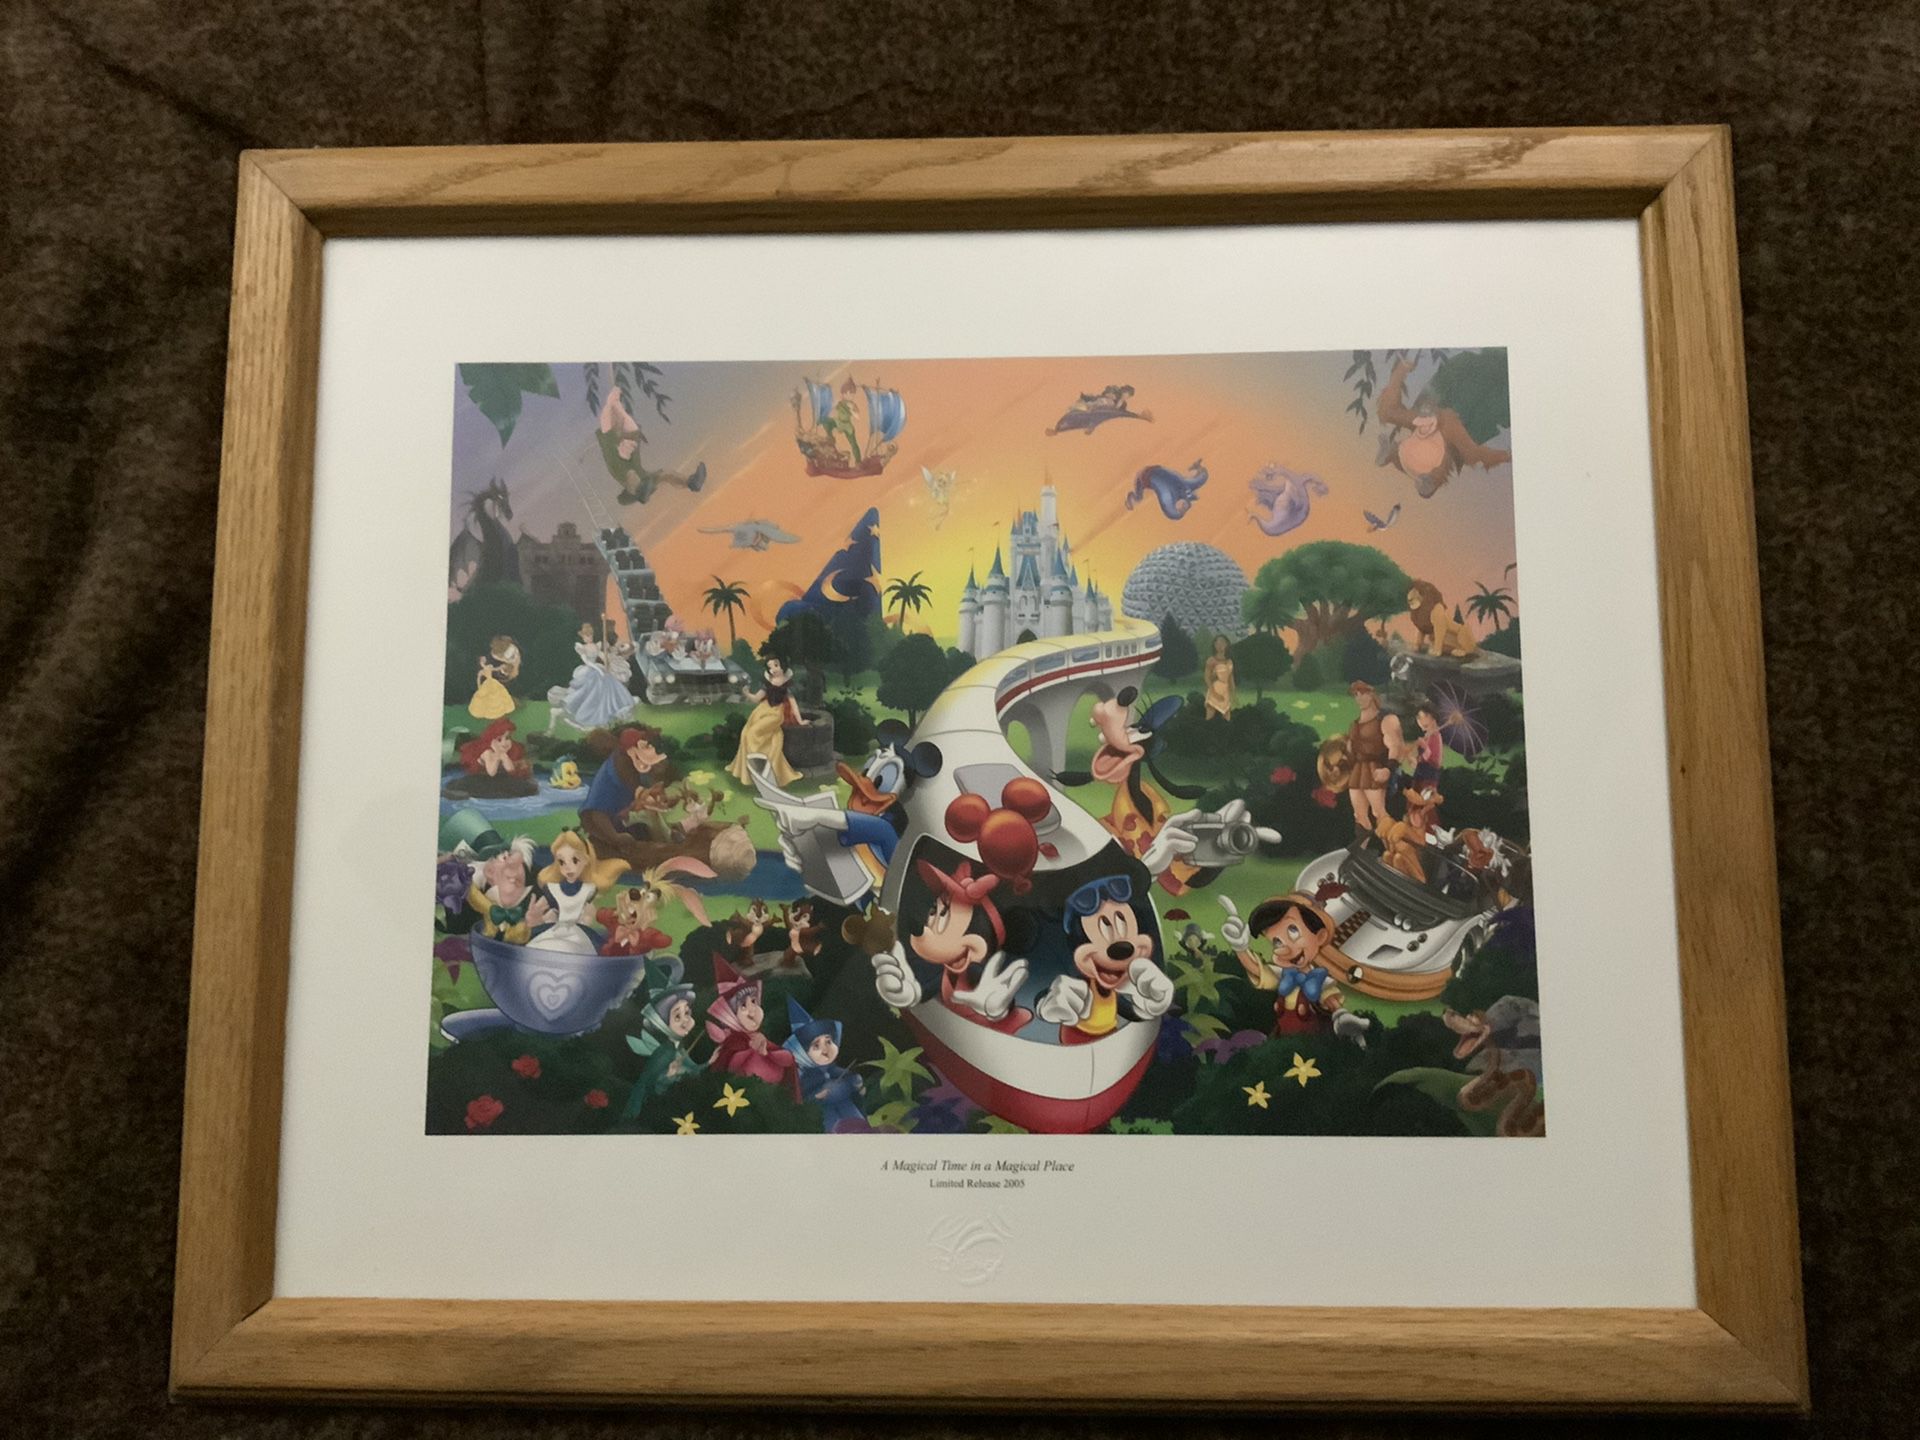 DISNEY 2005 " A MAGICAL TIME IN A MAGICAL PLACE" FRAME LITHO WITH COA